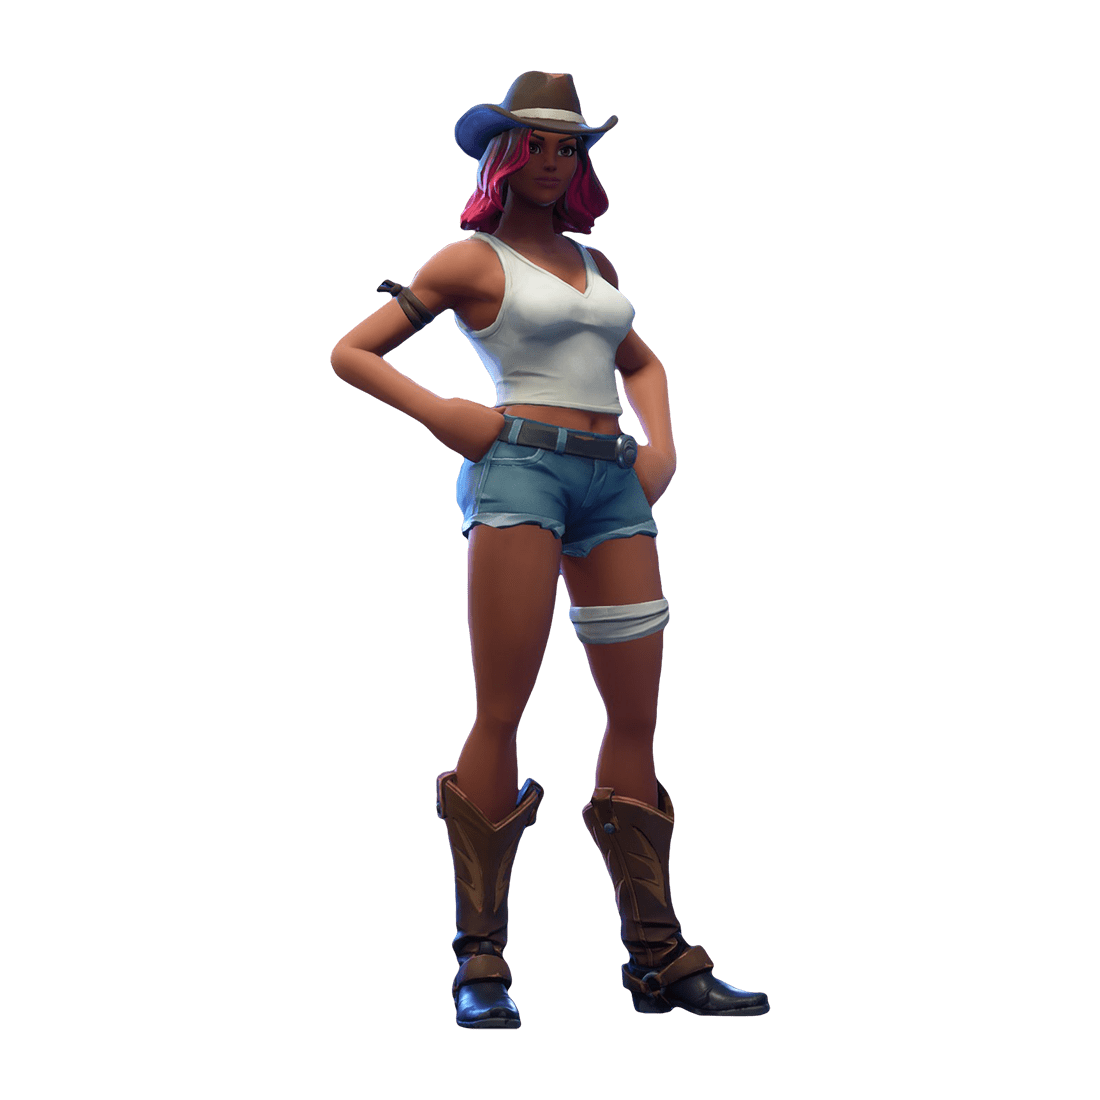 This visual is about fortnite calamity freetoedit #fortnite #calamity #free...